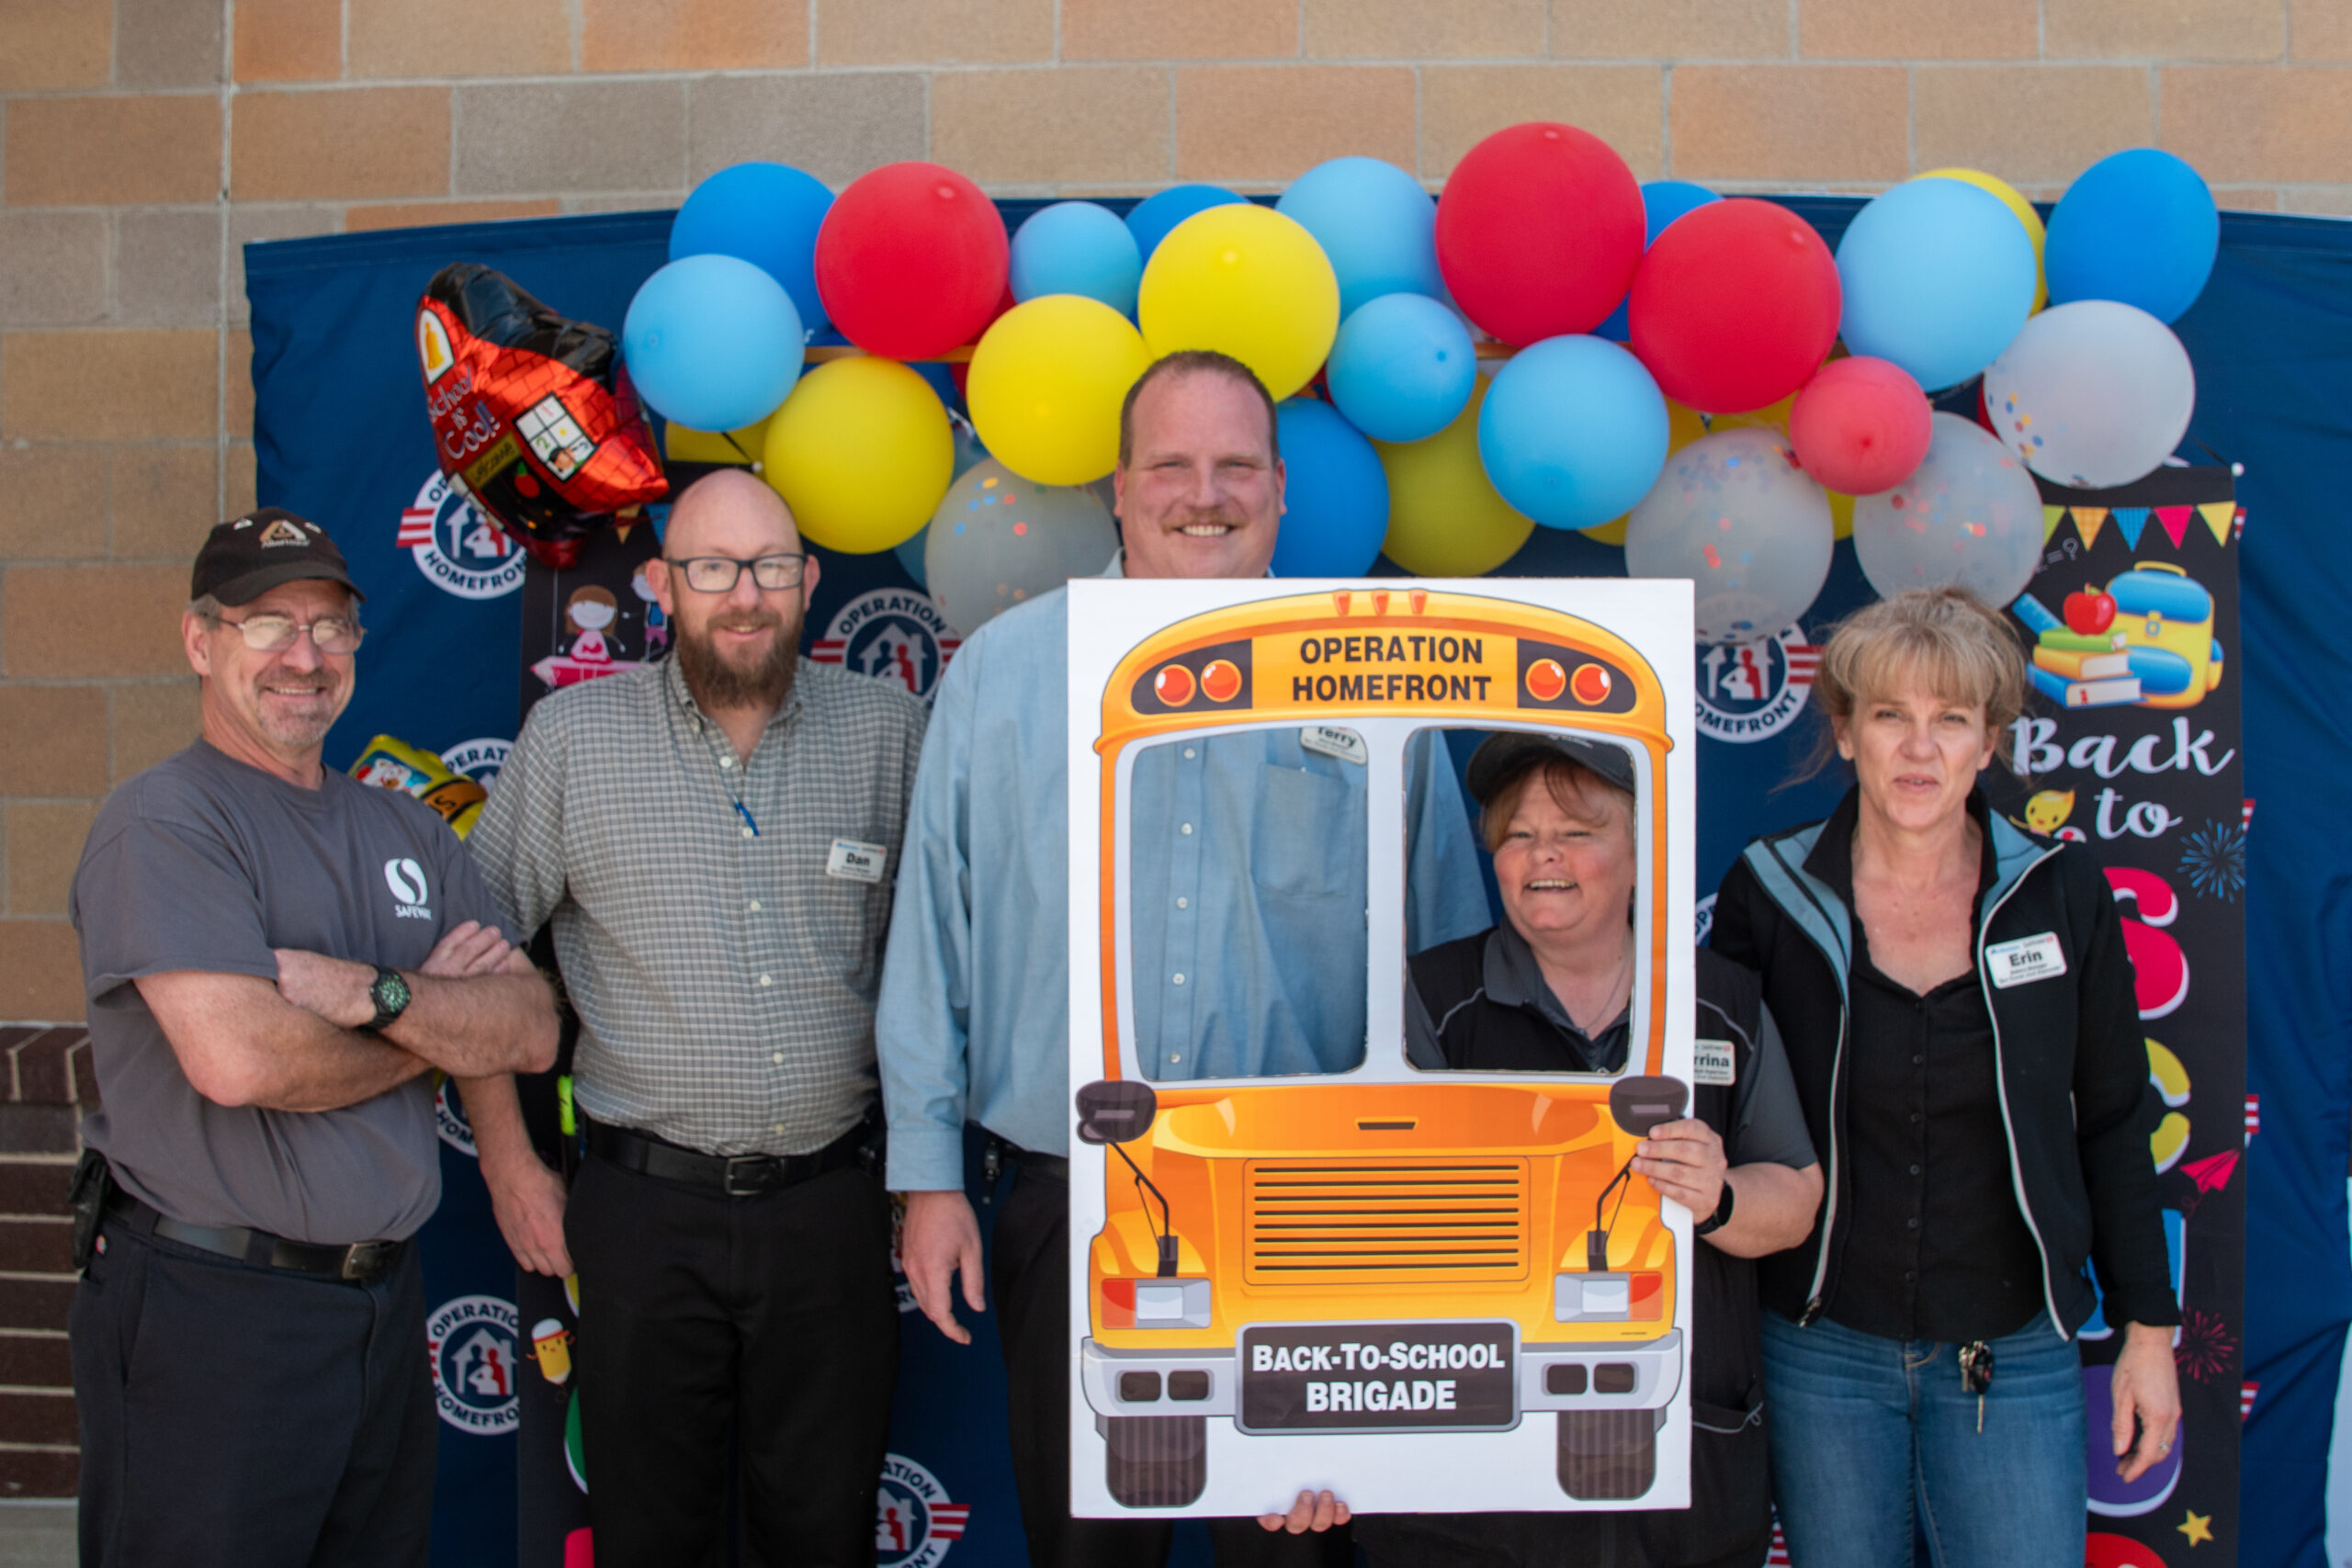 group of people holding a school bus operation homefront sign